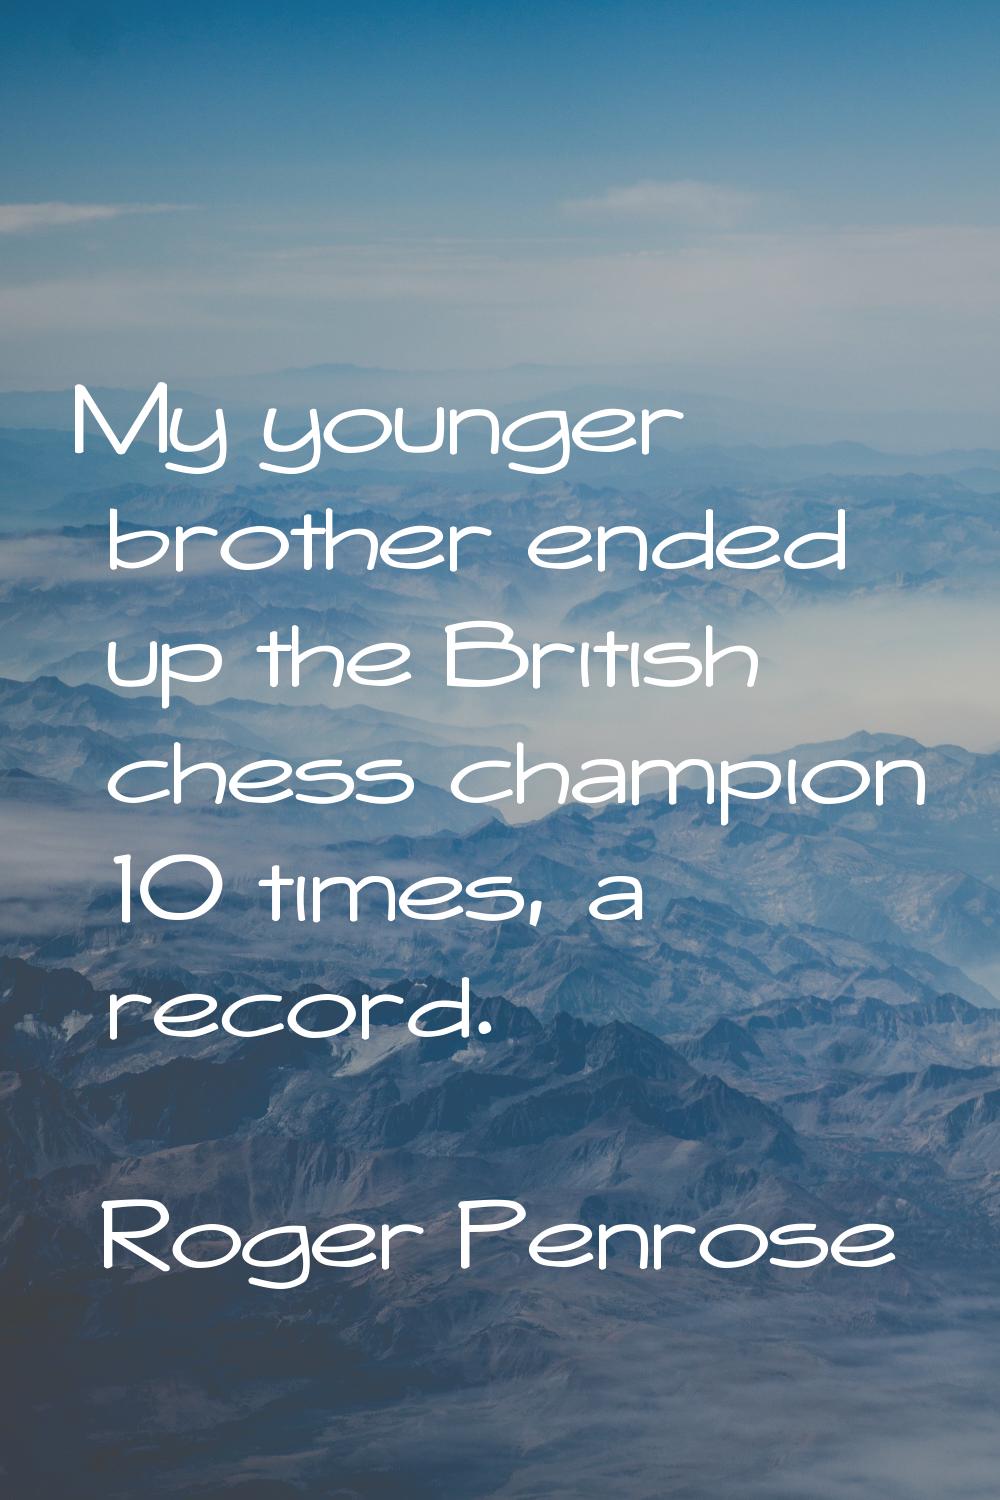 My younger brother ended up the British chess champion 10 times, a record.